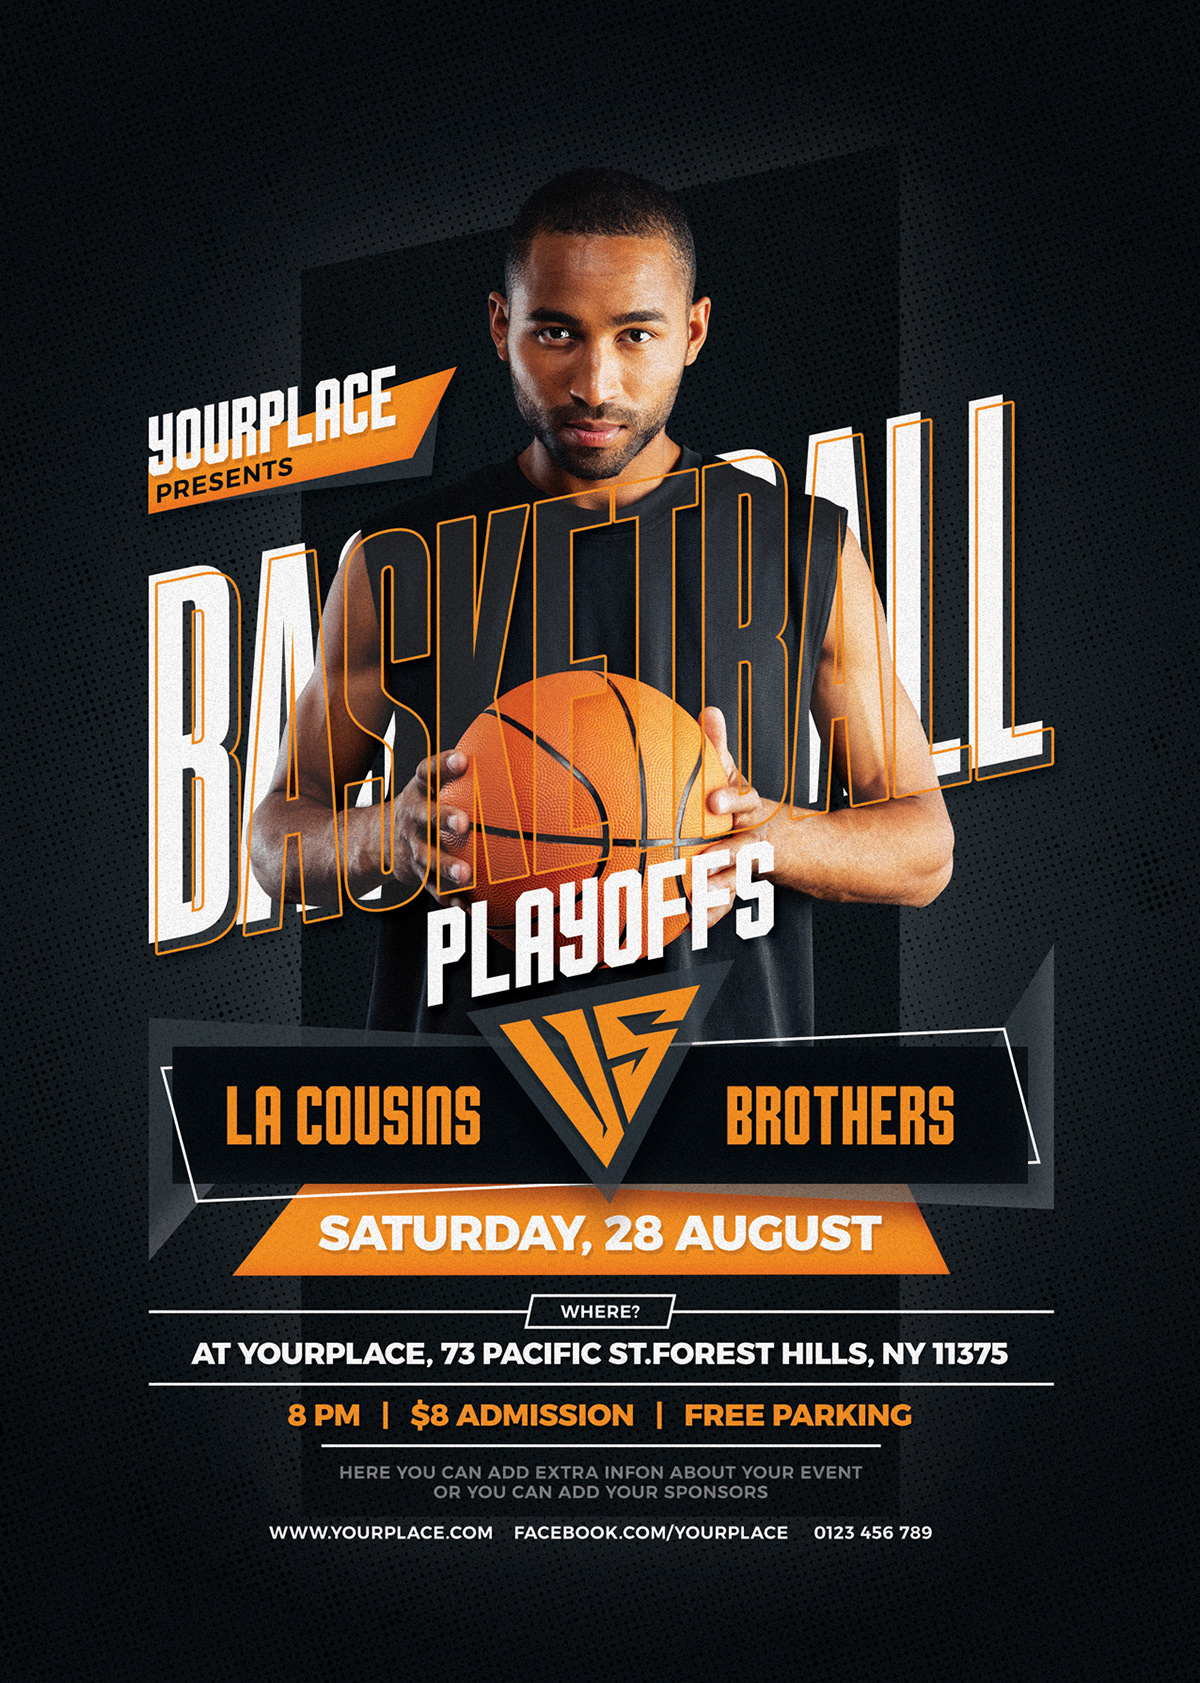 basketball flyer template free download, basketball flyer template download, 3 on 3 basketball tournament flyer template, basketball game day flyer template, basketball tryouts flyer template free, basketball flyer template psd, free basketball flyer template word